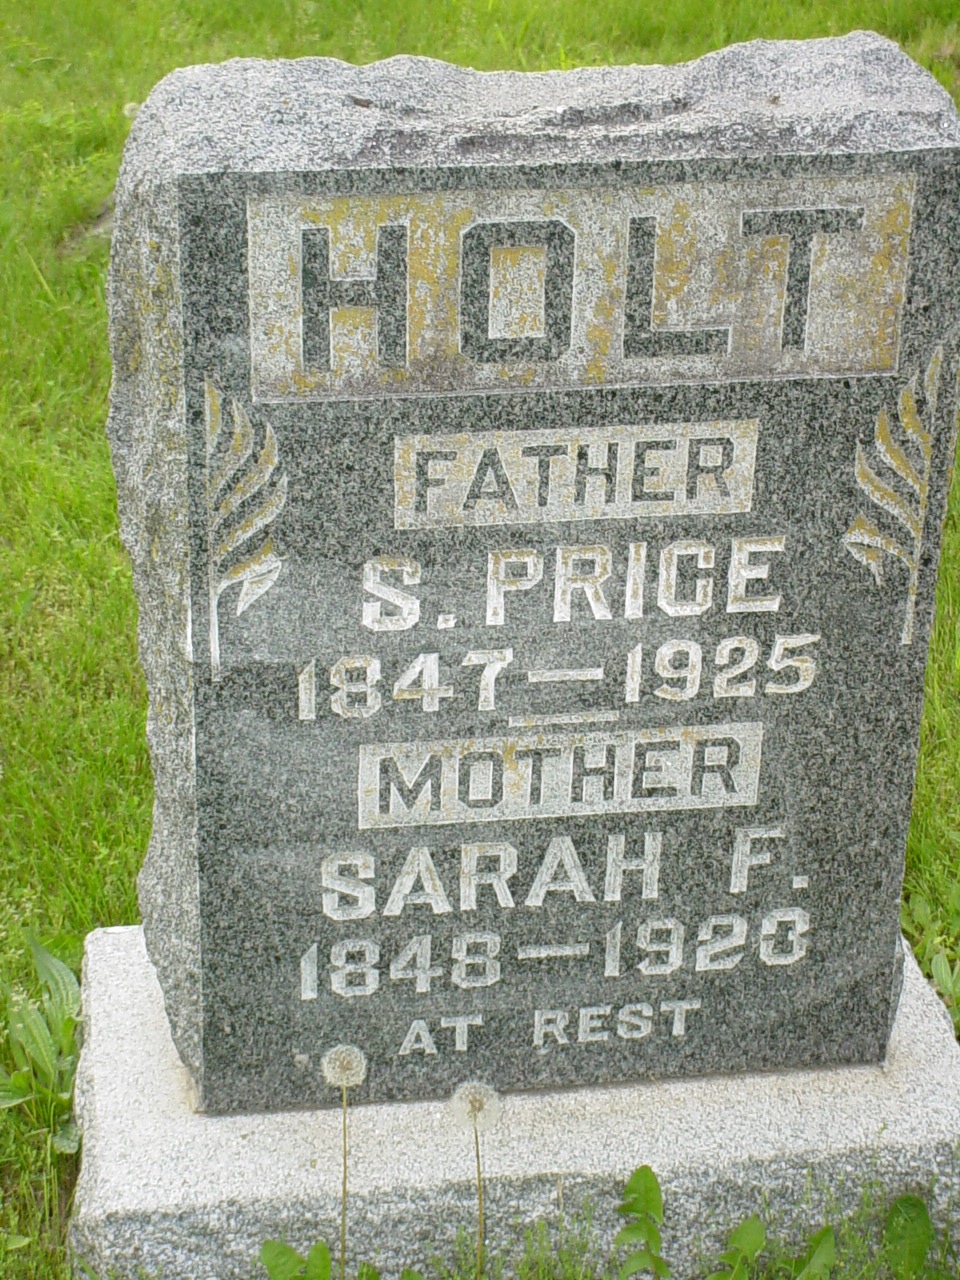  Sterling P. Holt & Sarah F. Vaughn Headstone Photo, Old Prospect Methodist Cemetery, Callaway County genealogy